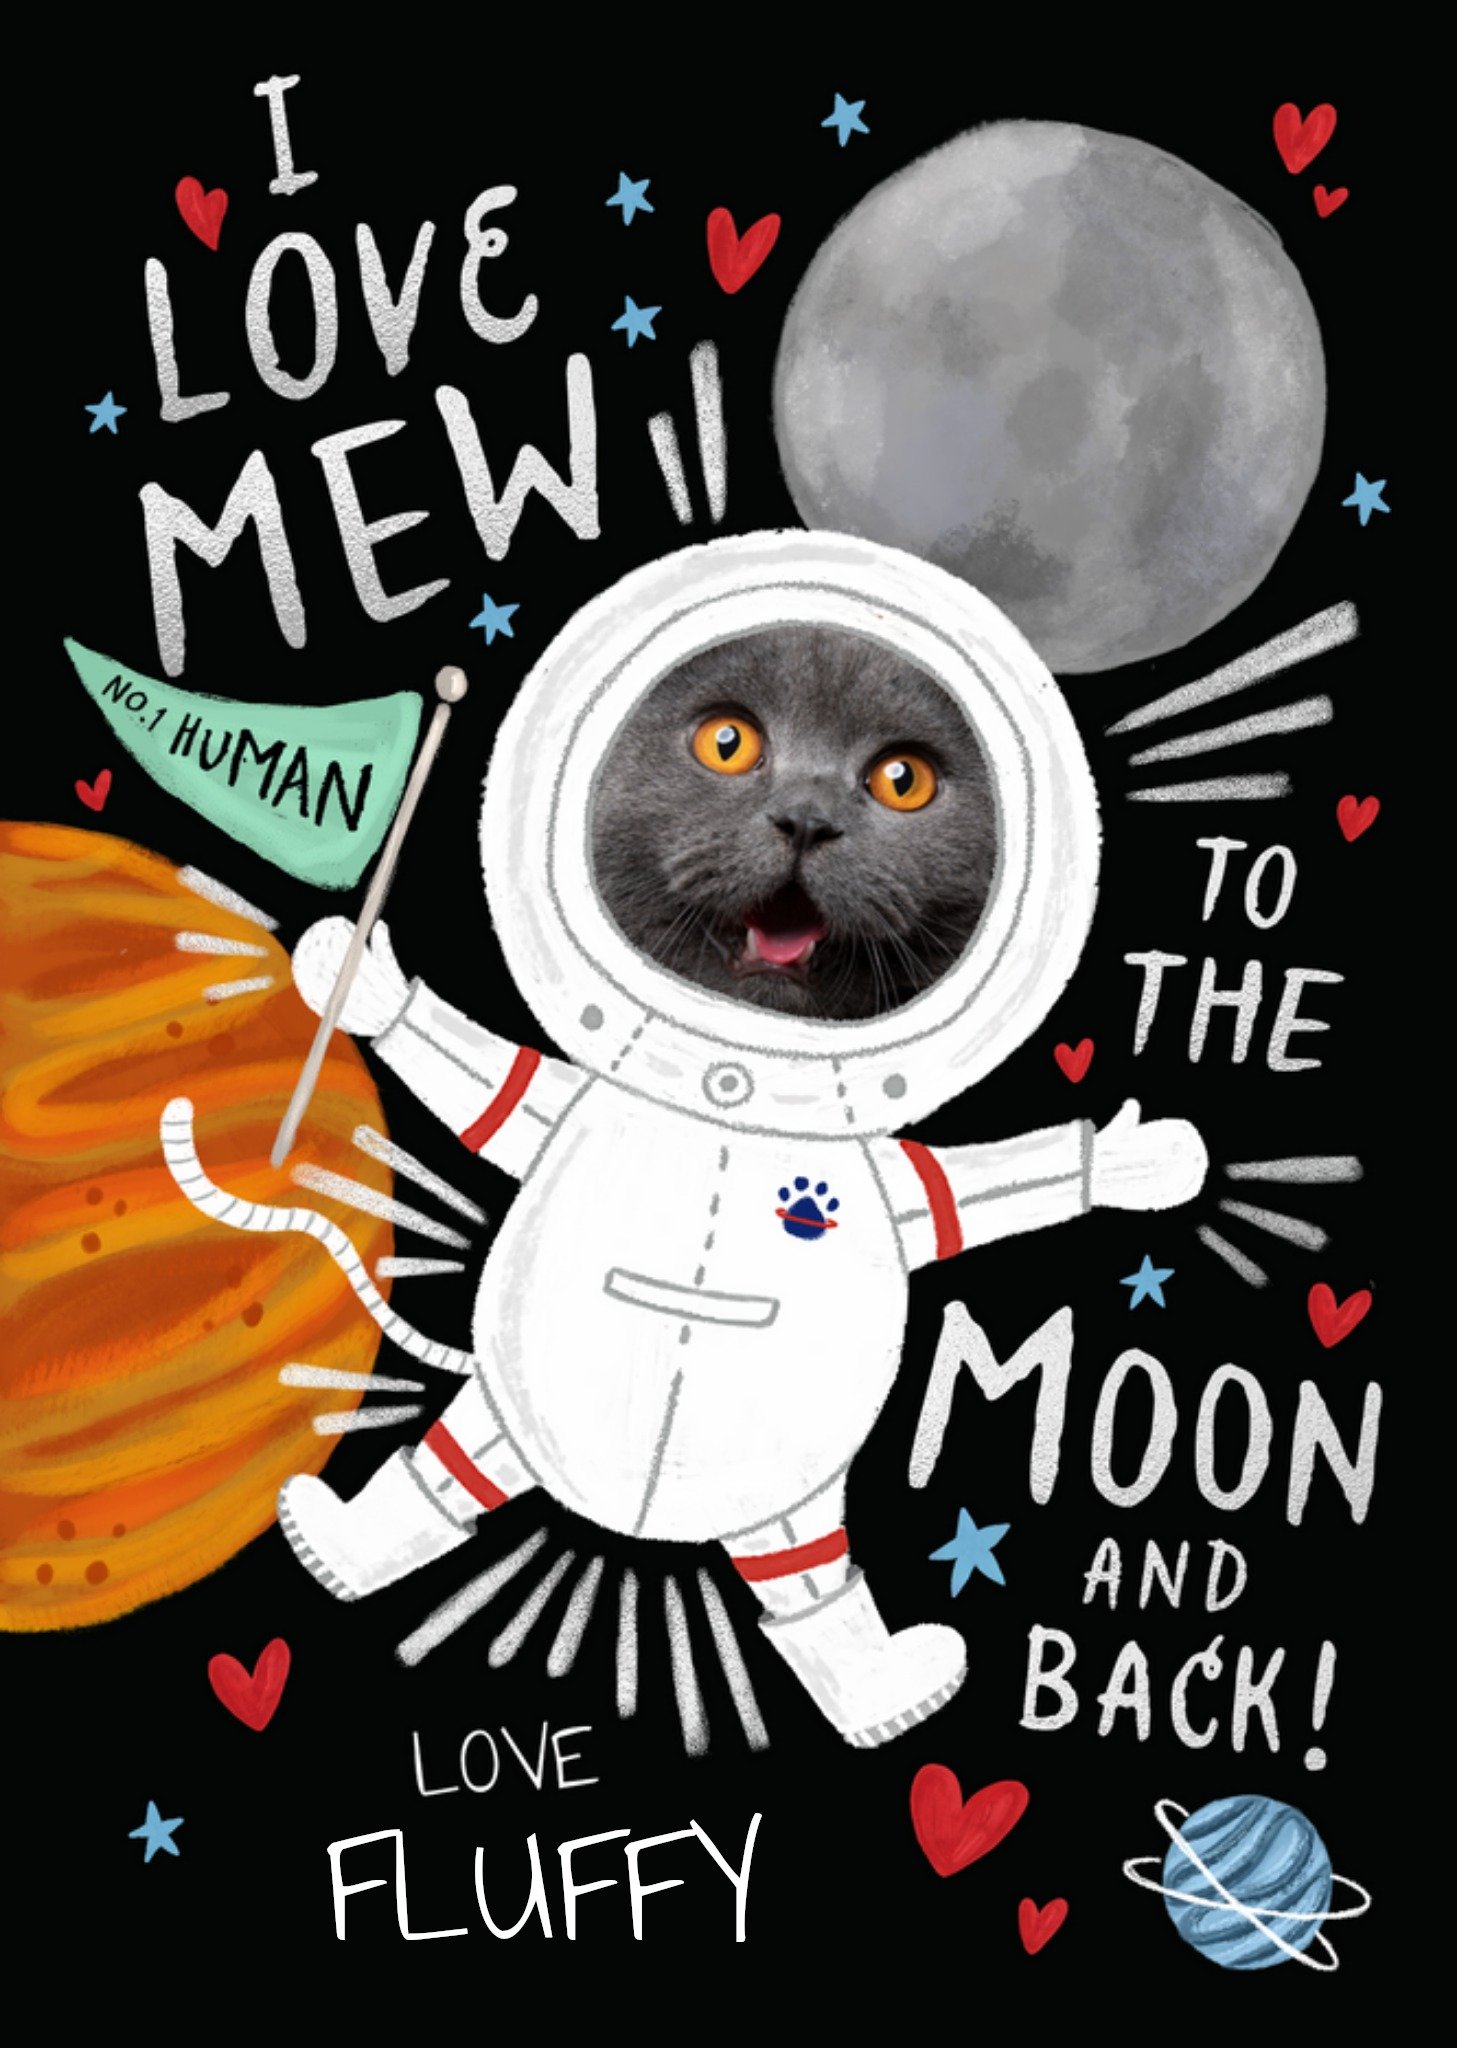 Moonpig I Love Mew To The Moon And Back Photo Upload From The Cat Card, Large